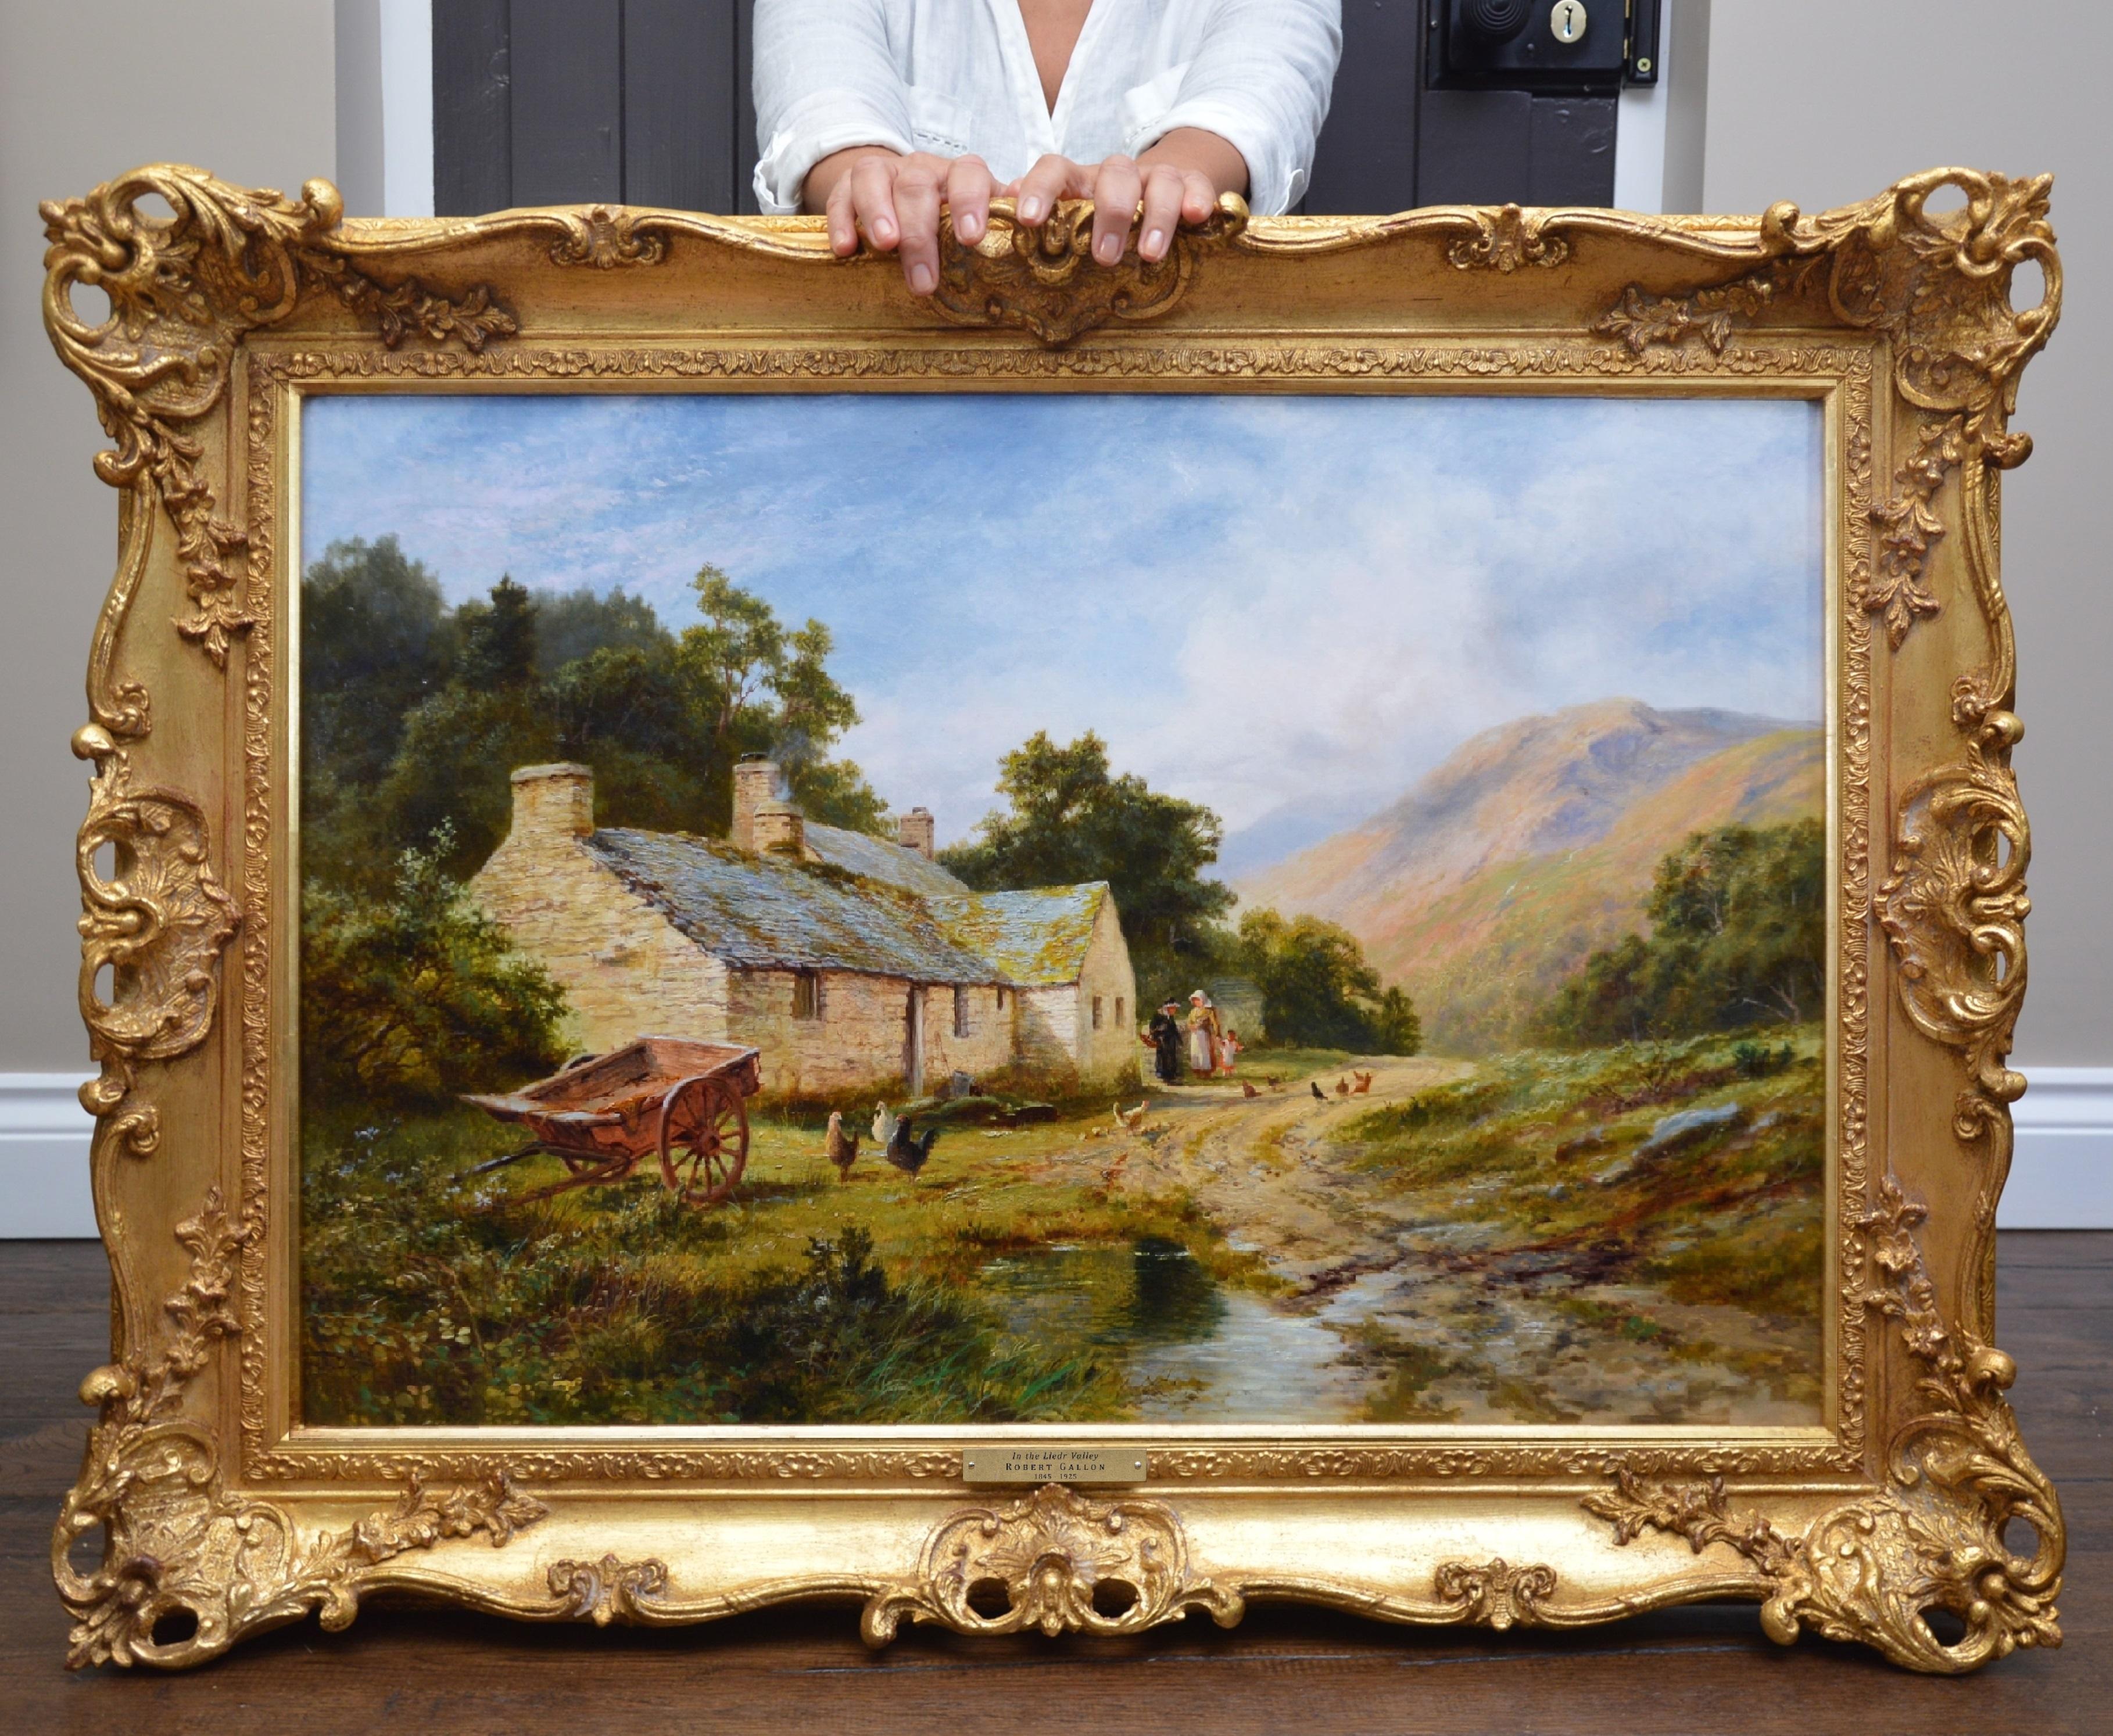 Robert Gallon Animal Painting - The Lledr Valley - 19th Century Summer Landscape Oil Painting of Snowdonia Wales